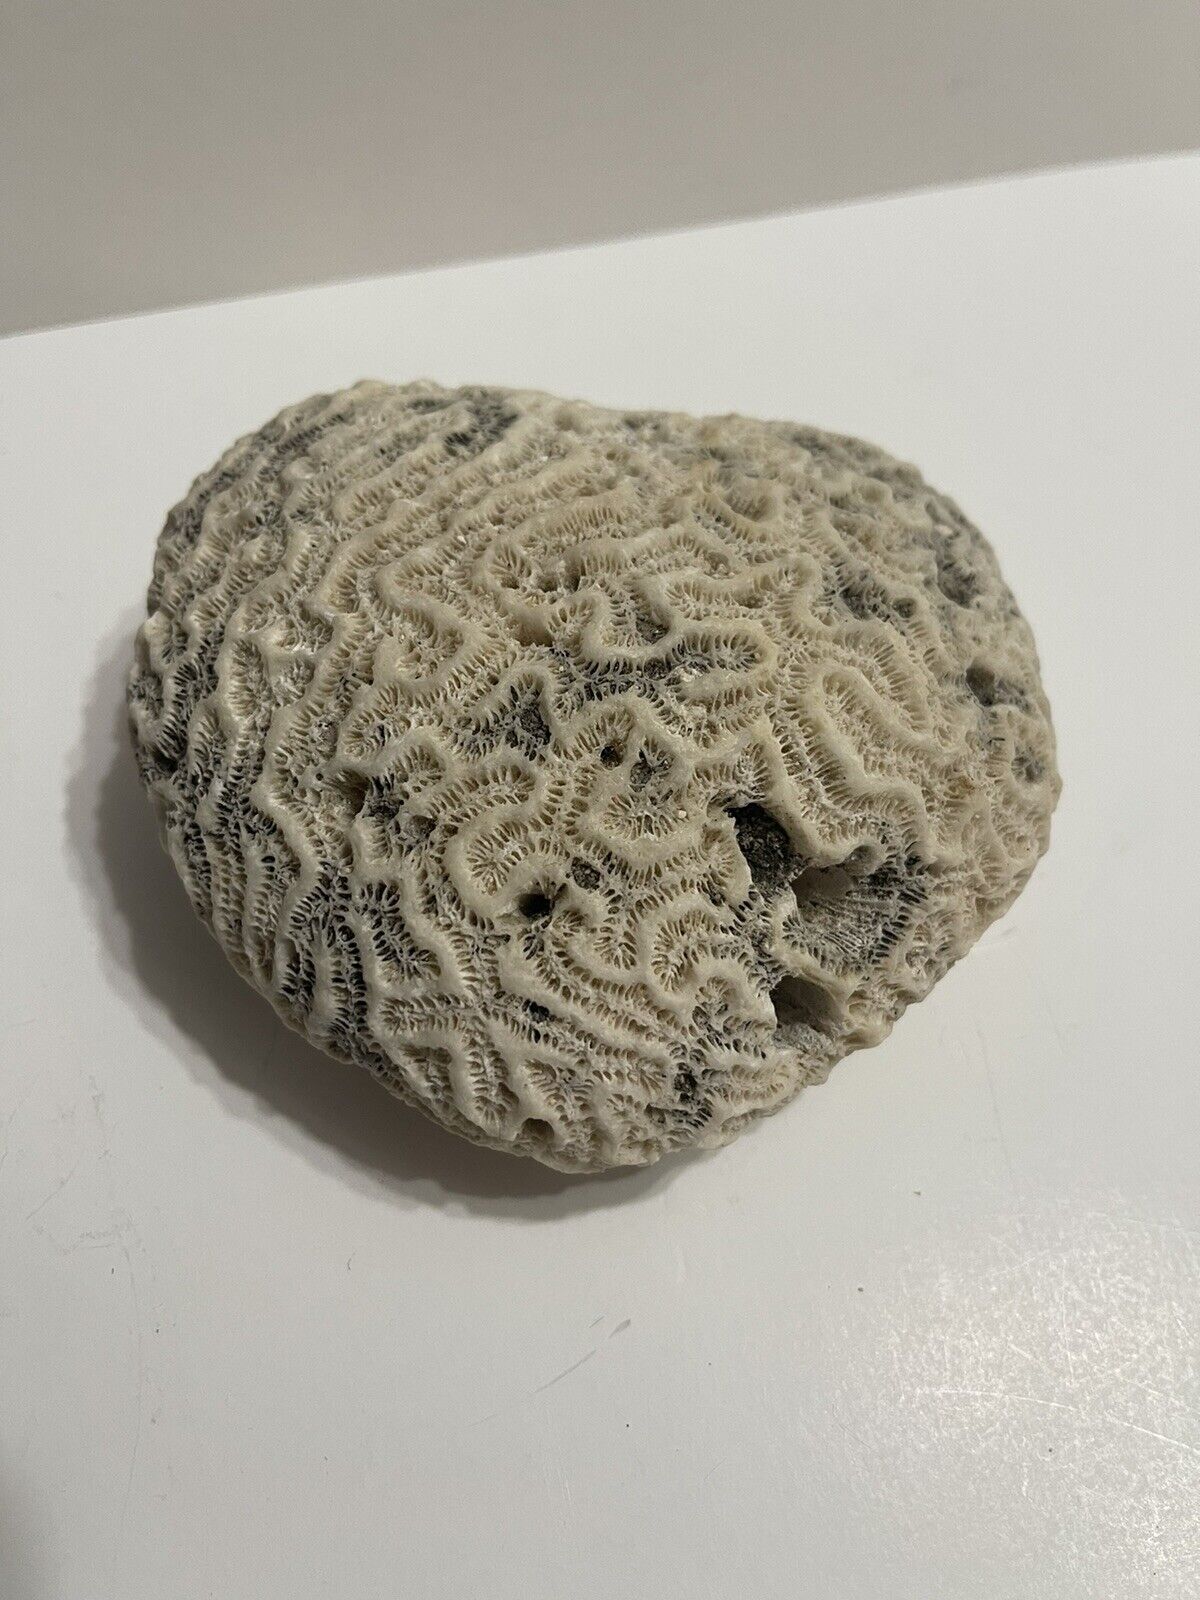 Brain Coral Fossil 1 Lb 2 Oz Nice Size And Color